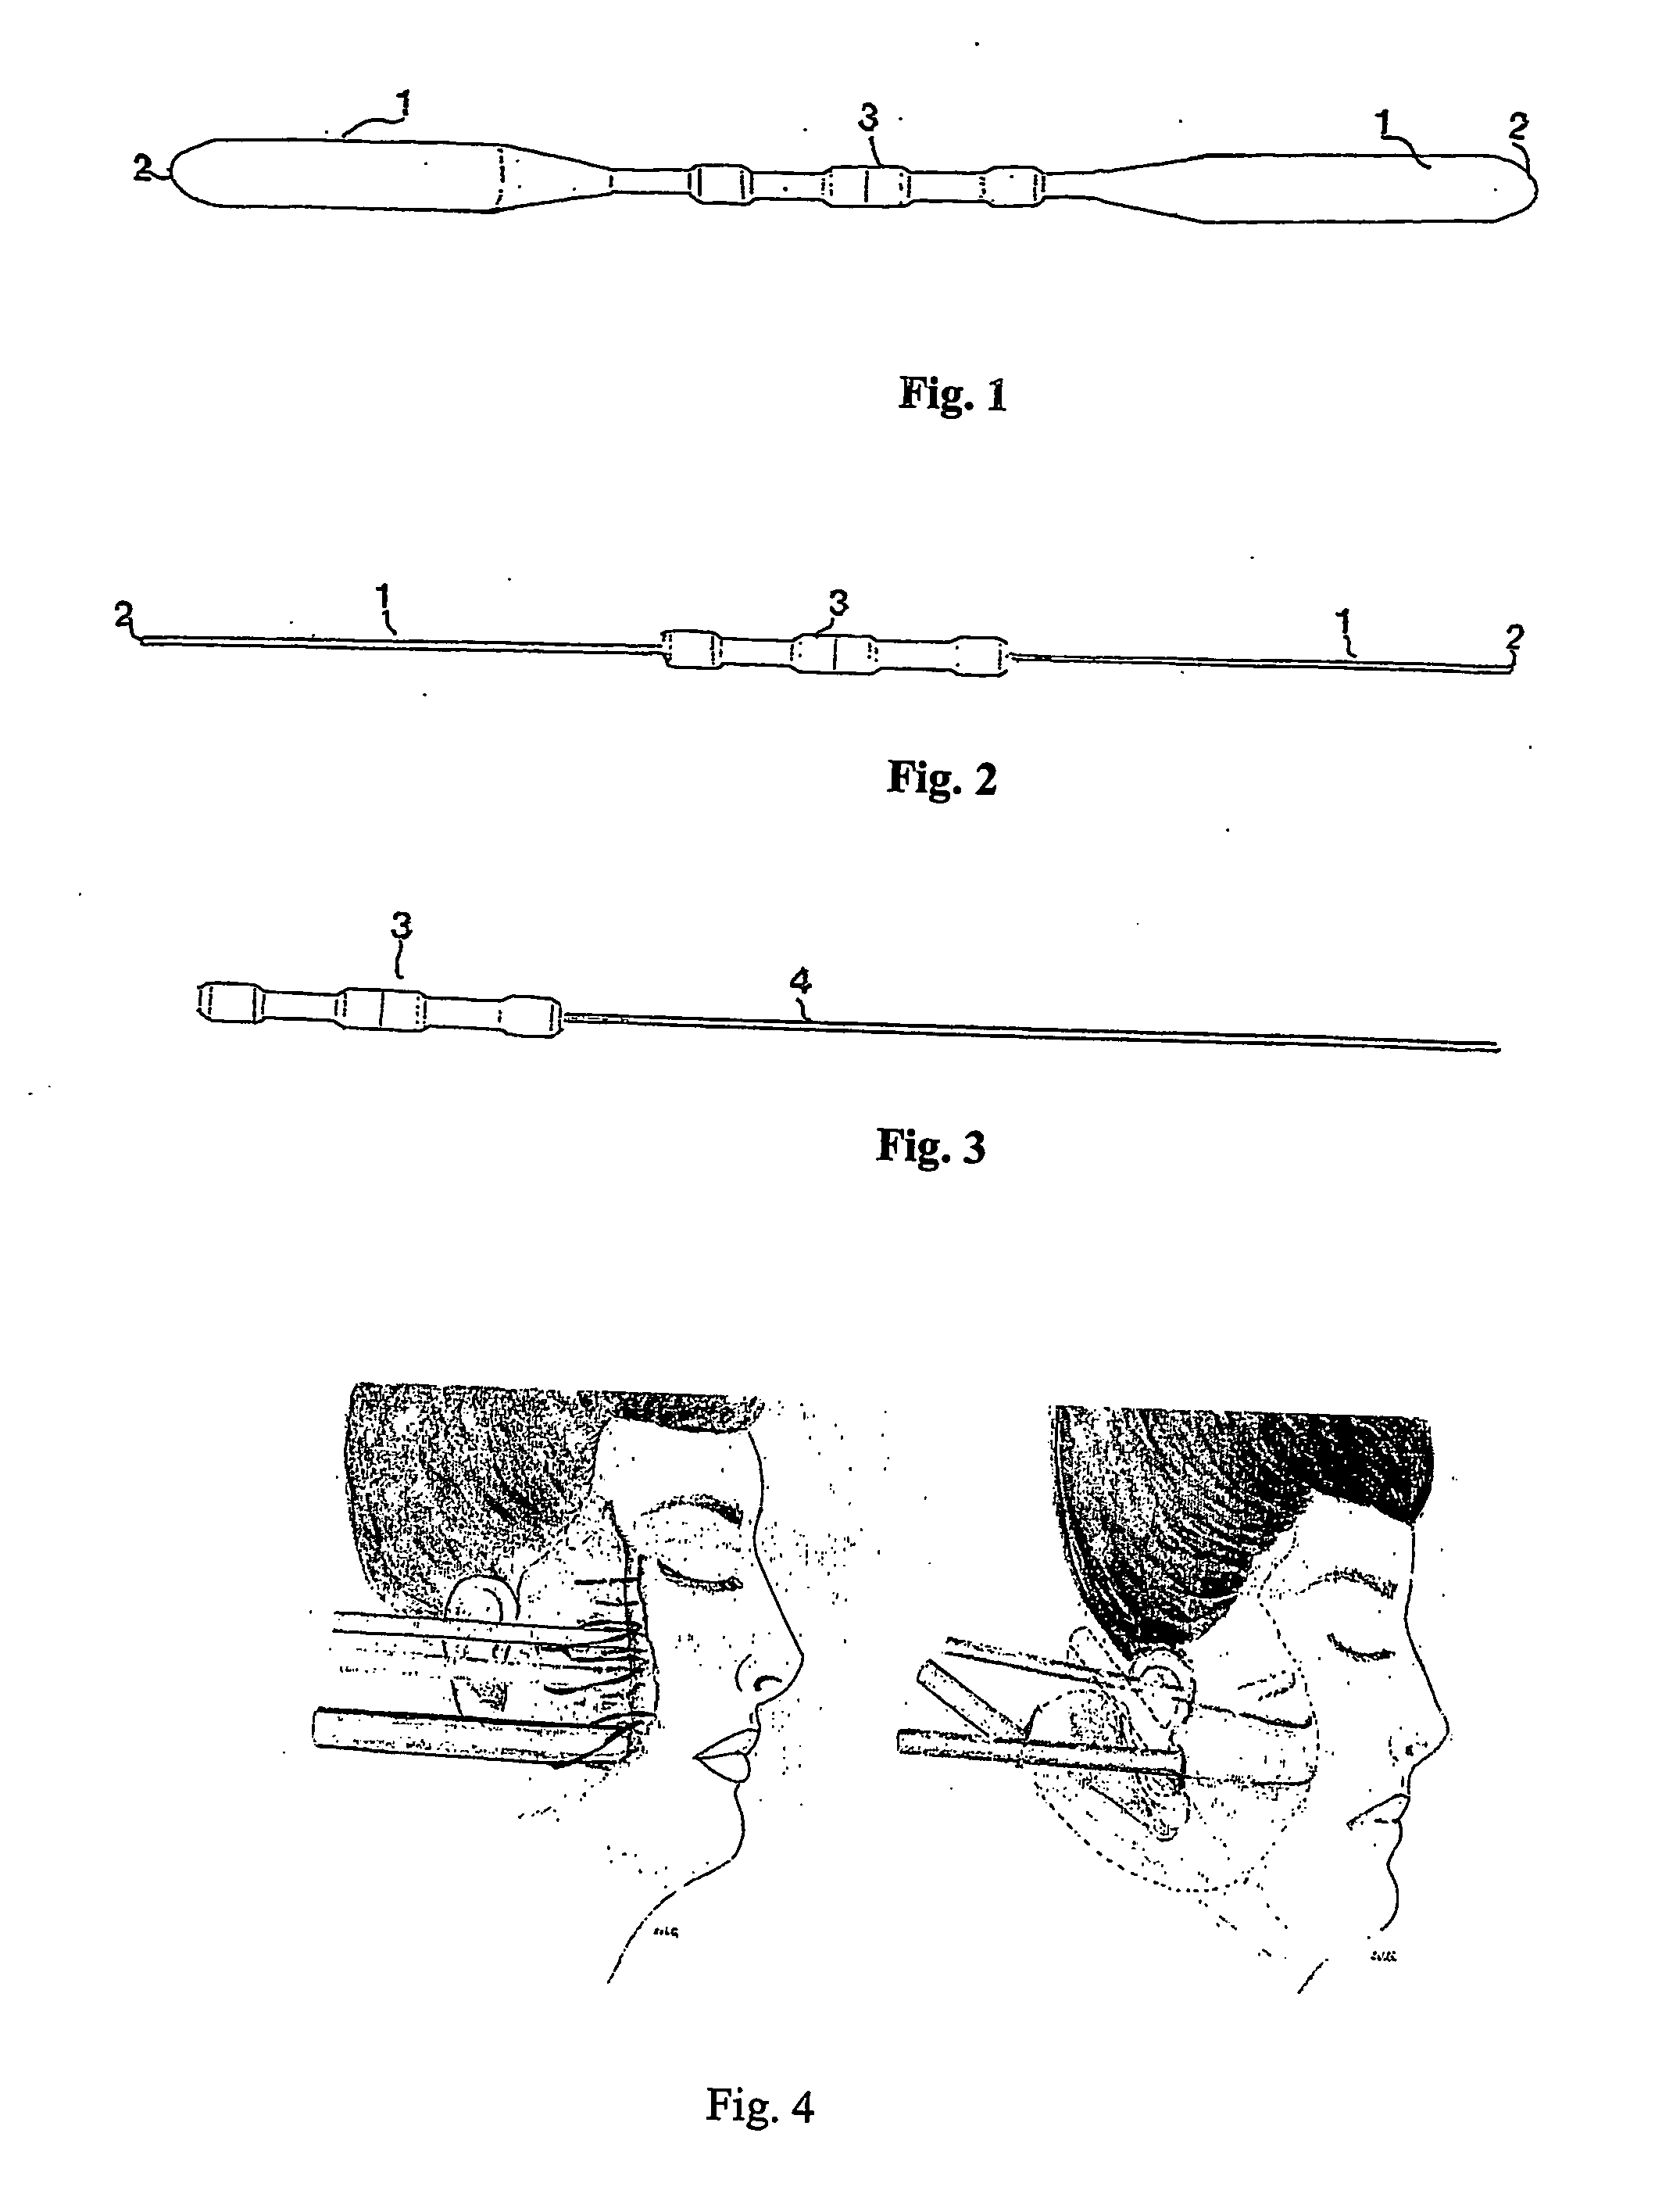 Surgical device and method for cutaneous detachment of skin